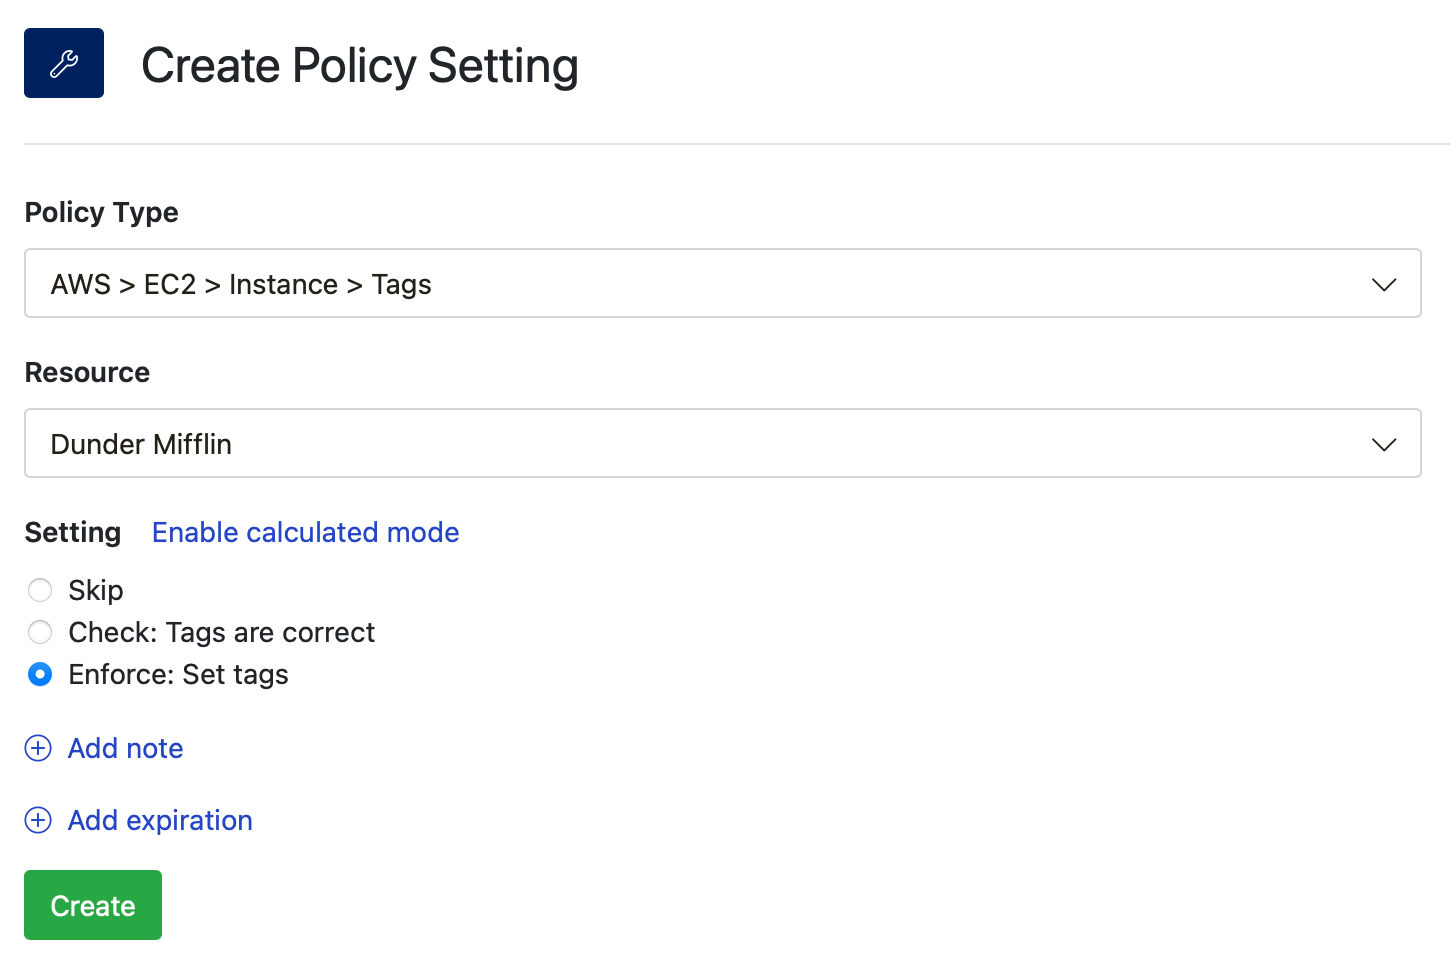 Enable tagging policy setting